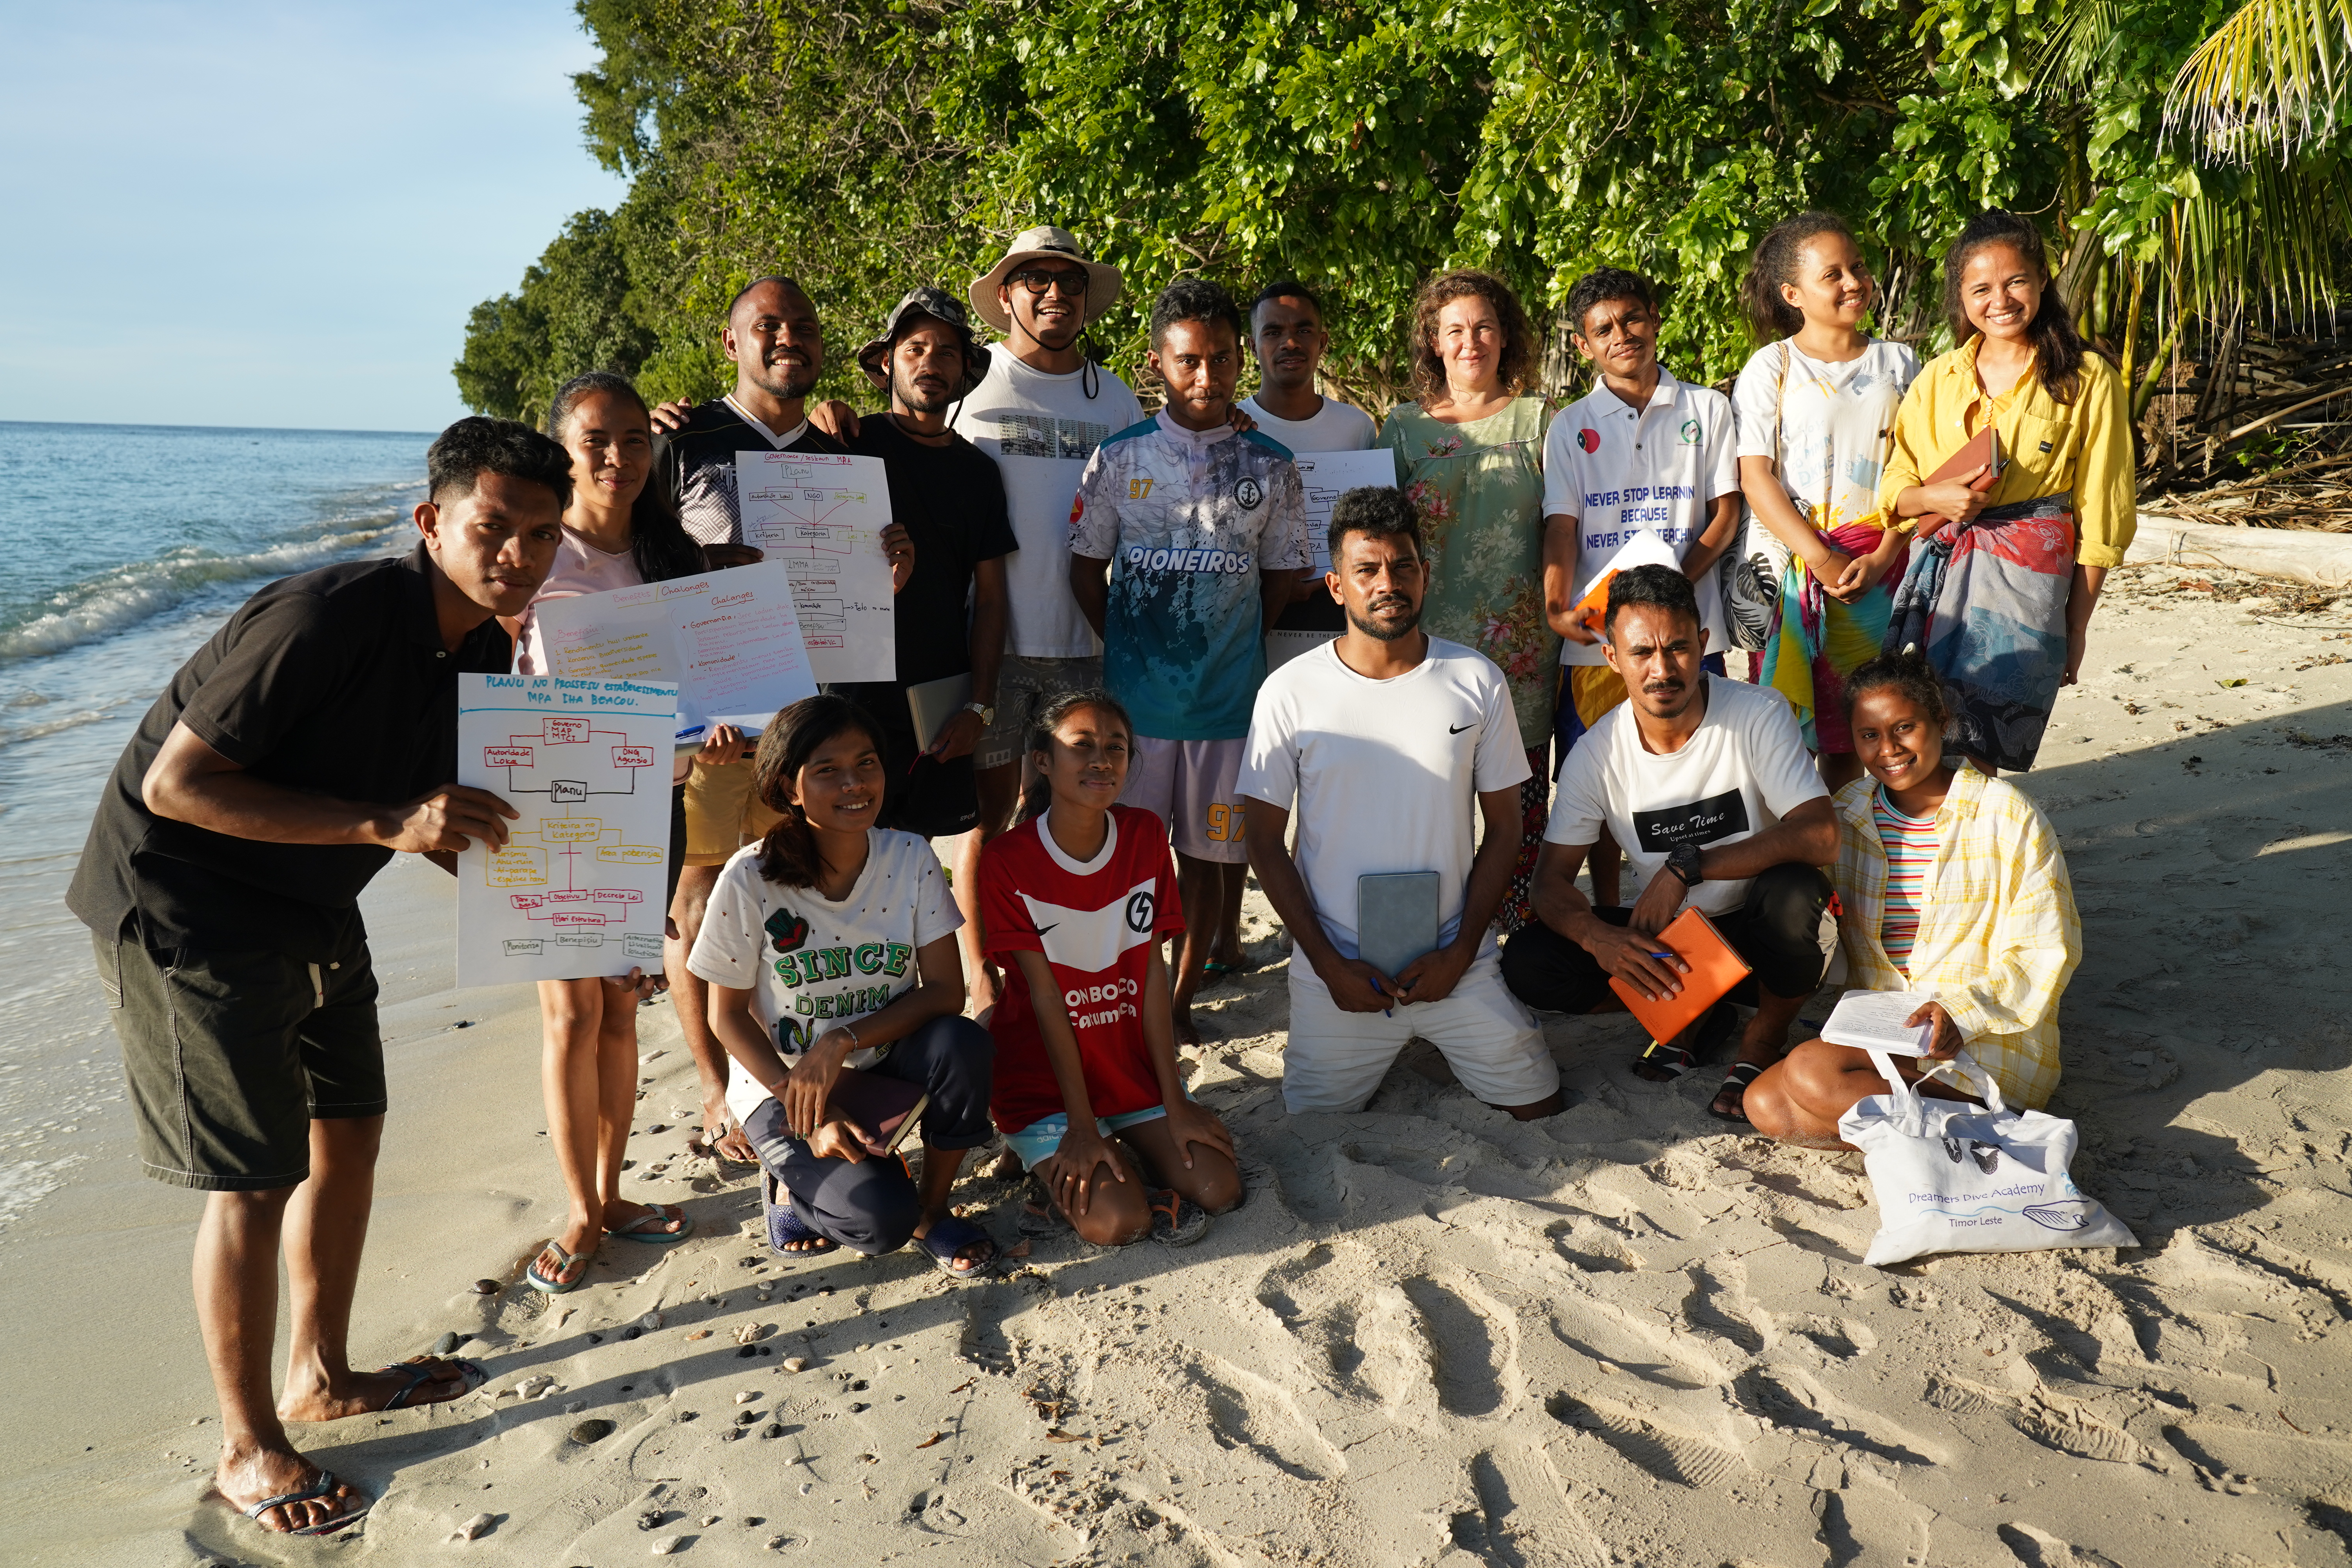 The marine science students participated in five days of fieldwork training led by WorldFish in Atekru, Atauro Island. Photo by Thomas Guery.